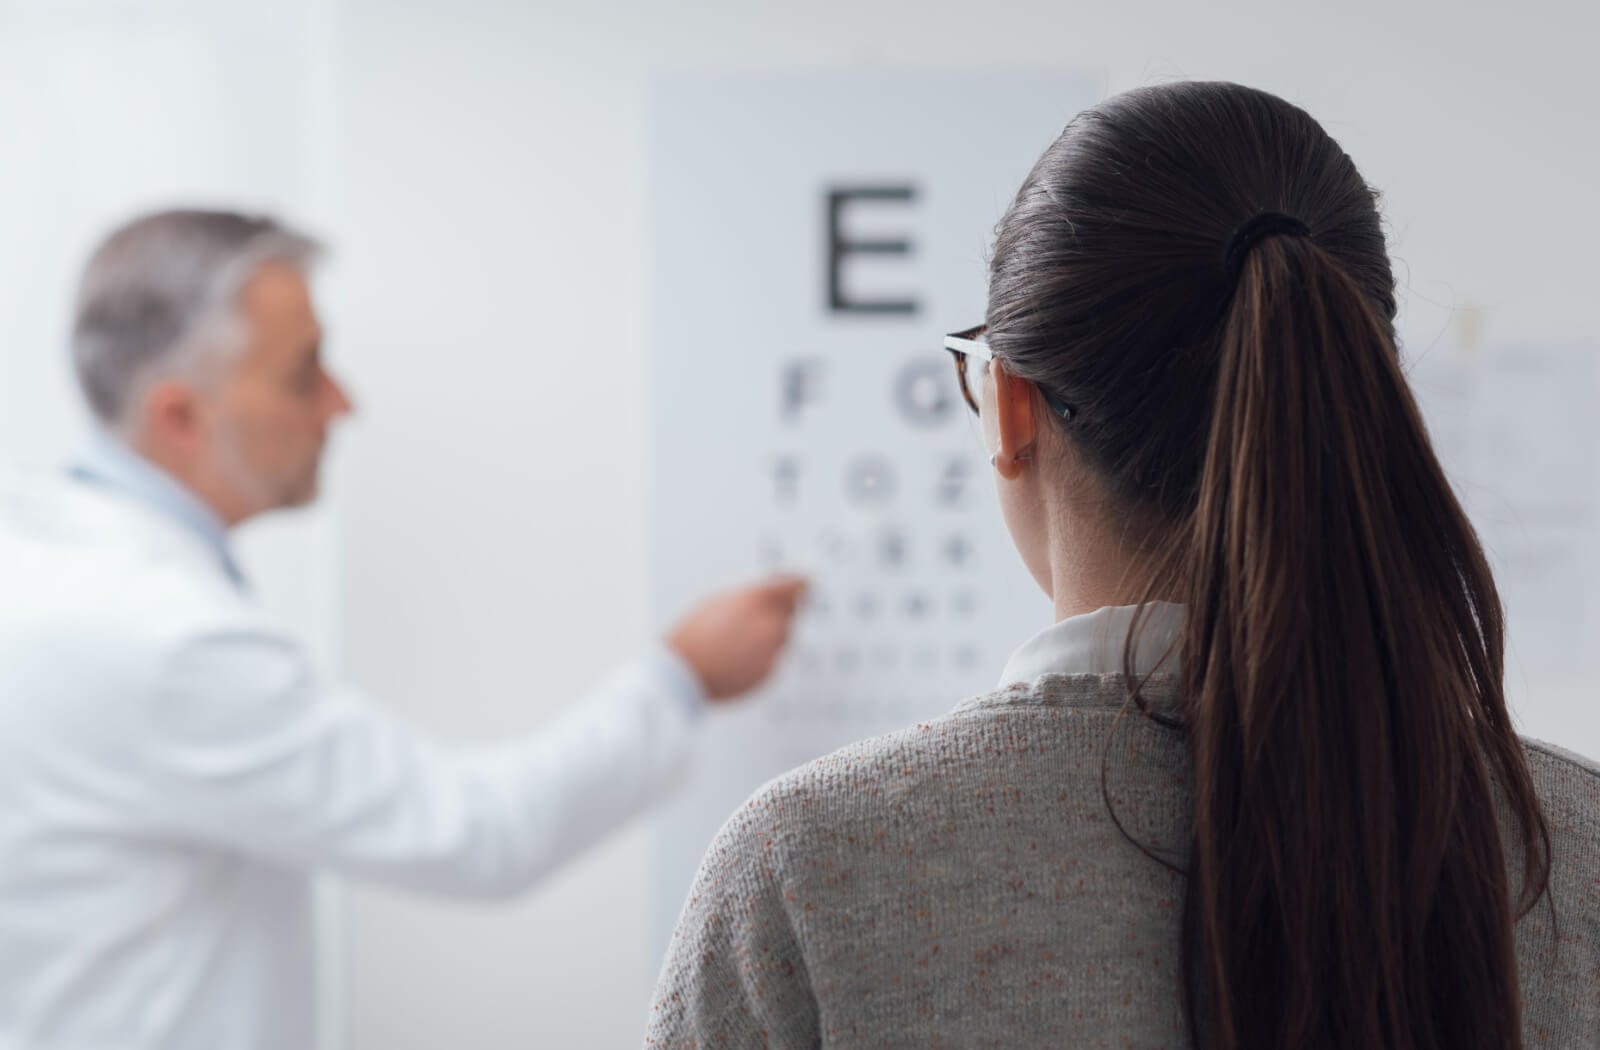 A lady in a brown-colored sweat shirt is facing far from the wall while the optometrist is pointing something into the Snellen chart.